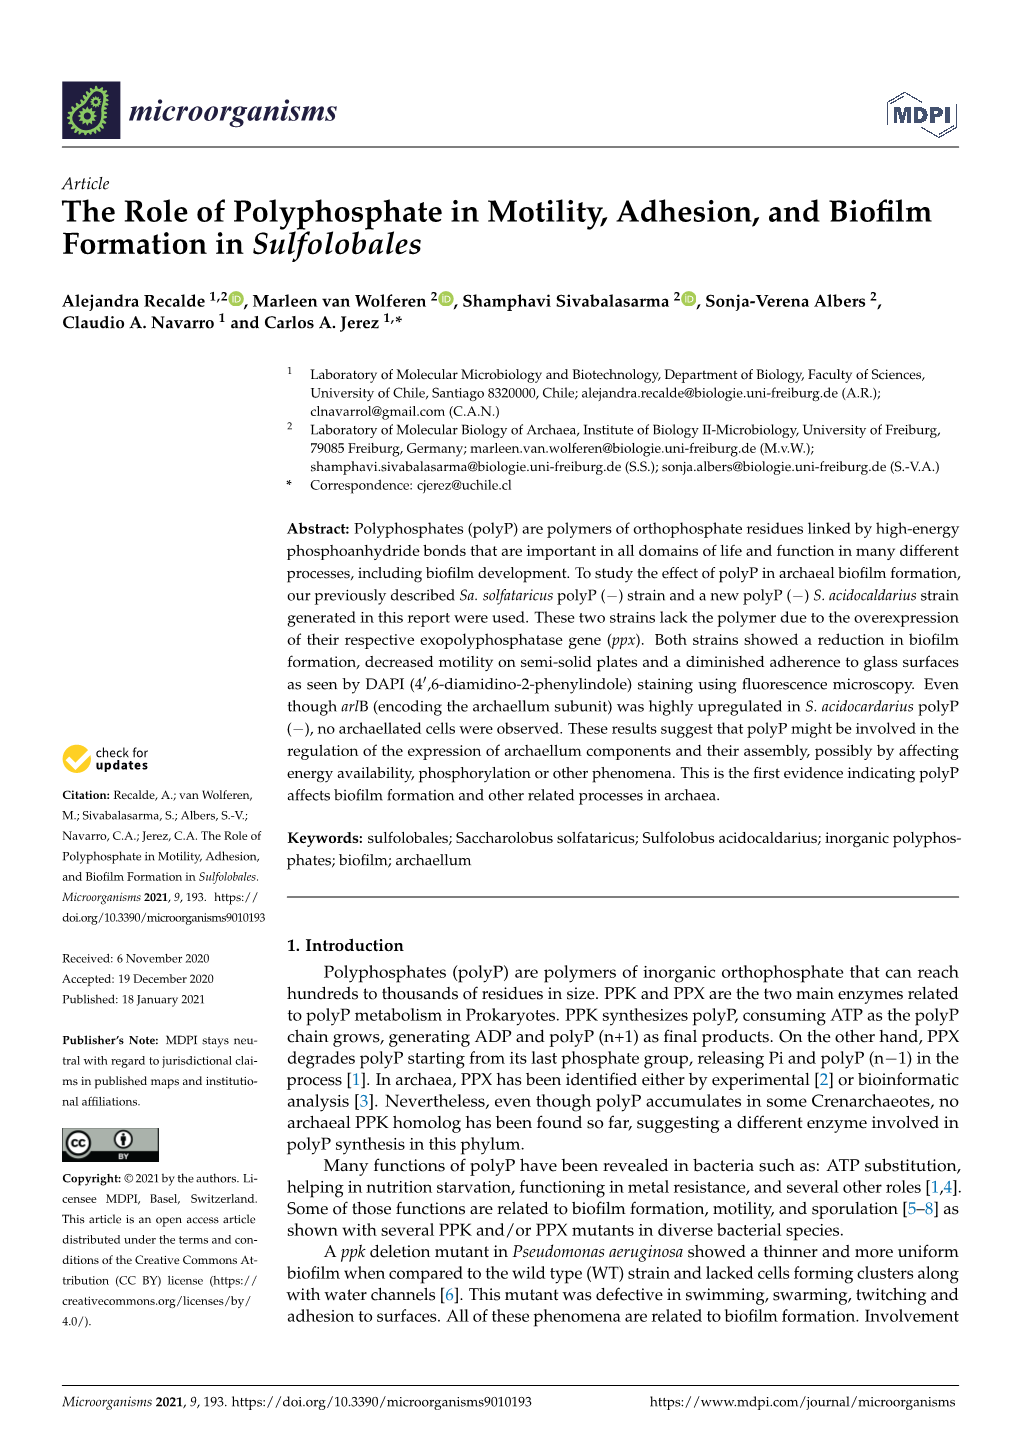 The Role of Polyphosphate in Motility, Adhesion, and Biofilm Formation in Sulfolobales. Microorganisms 2021, 9